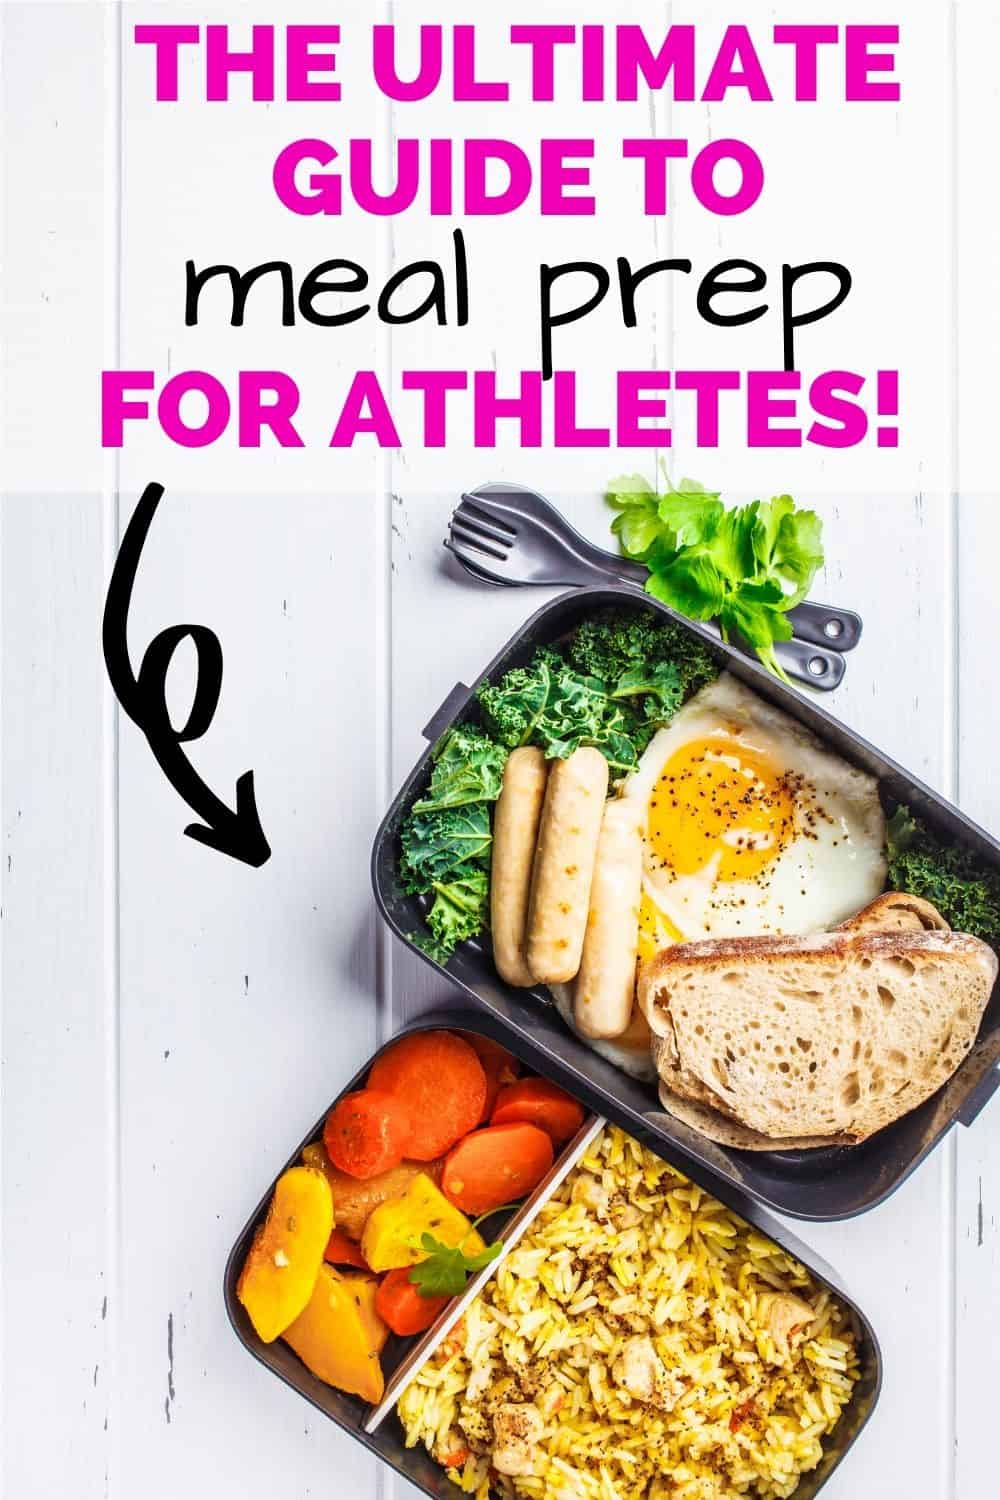 Athlete-approved meals